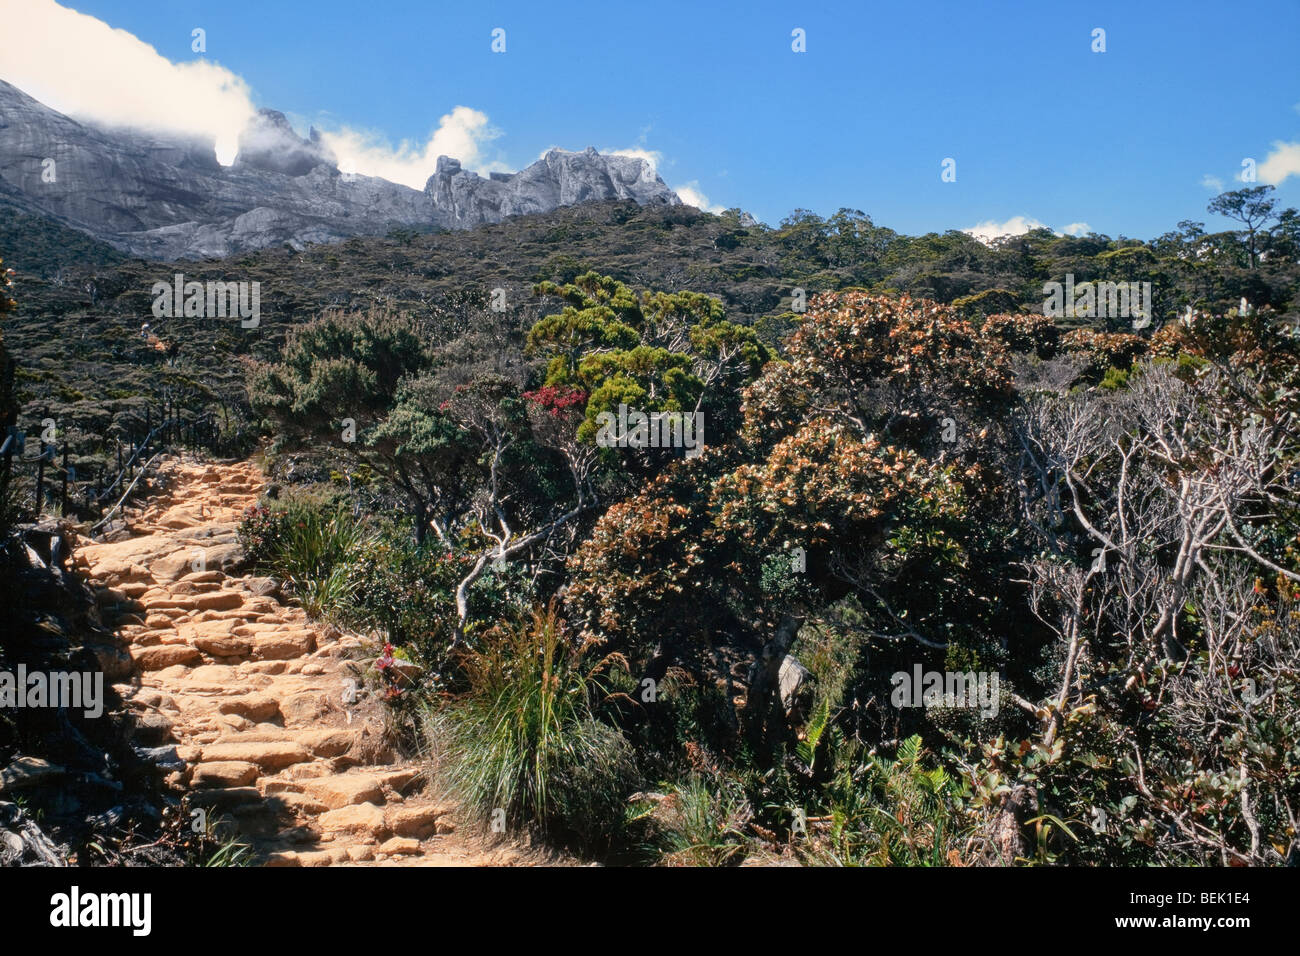 Gunung Kinabalu sub-alpine meadow zone. 3,300 meters (11,000 feet),  The trees are gnarled and stunted, bright sunny day Stock Photo